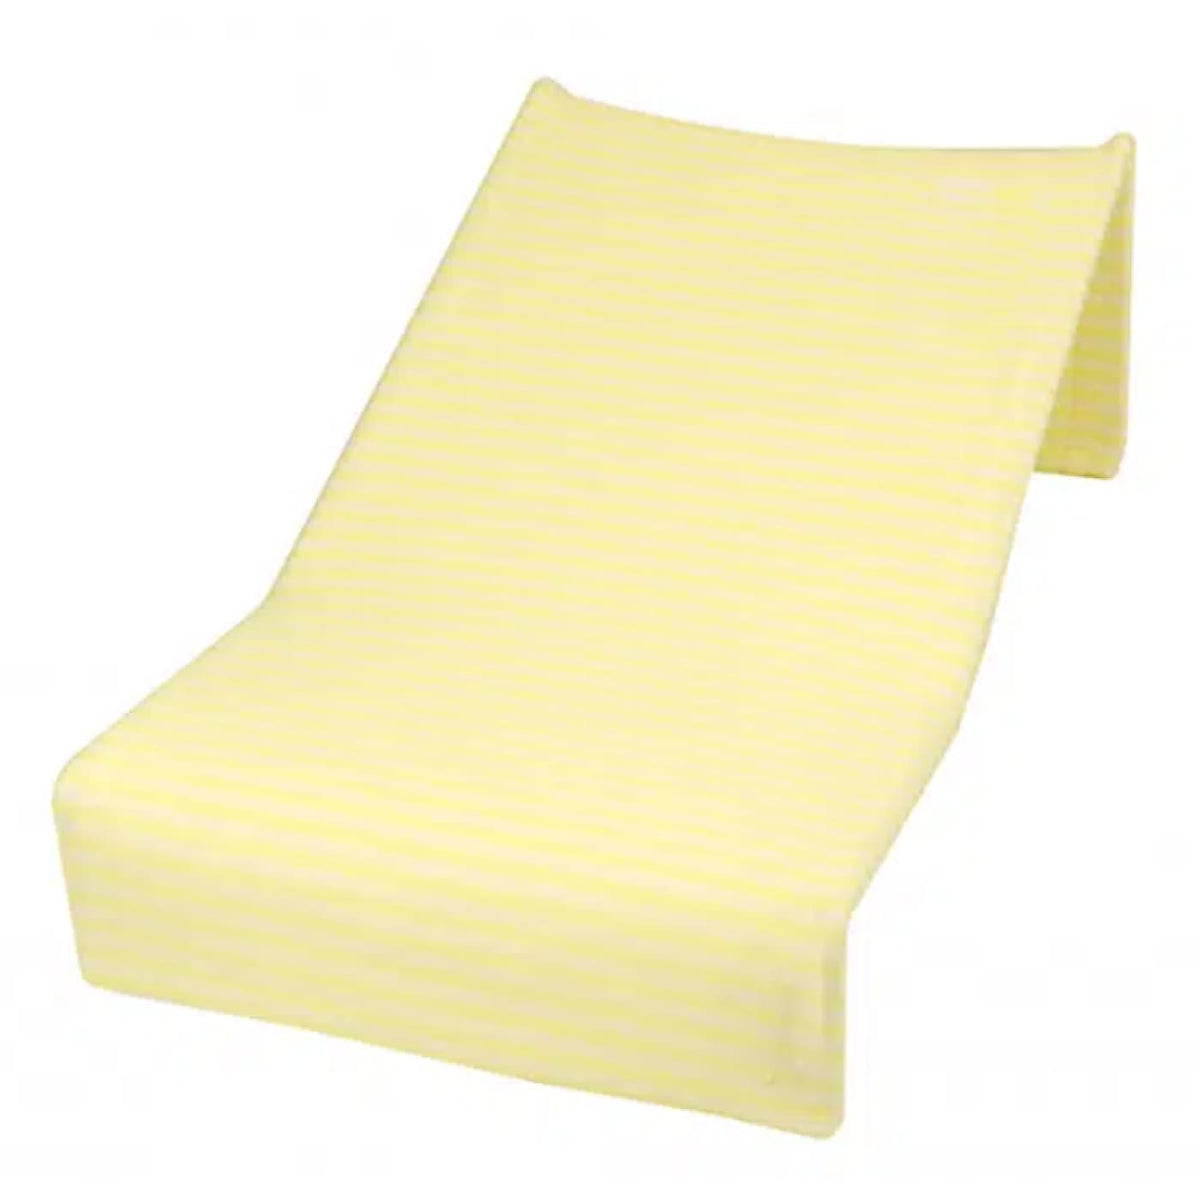 Babyhood Bath Support Towelling - Yellow/White Stripes - Yellow/White Stripes - BATHTIME &amp; CHANGING - BATH SUPPORTS/SEATS